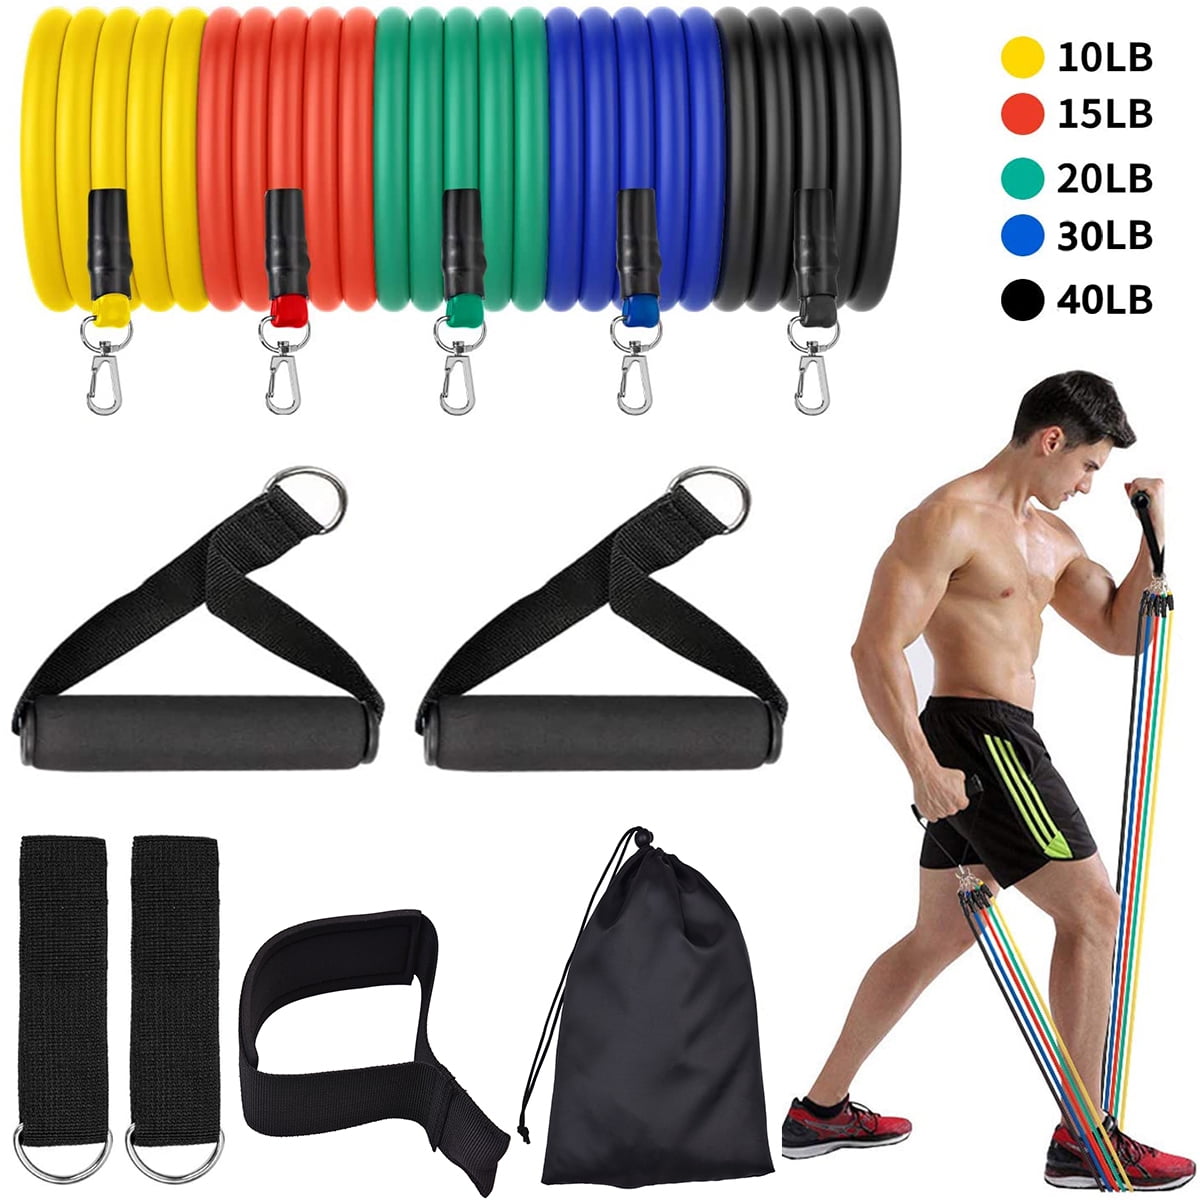 Exercise Bands with Handles Stackable Up to 150 lbs,for Resistance Training,Weight Training,Home Workouts. Resistance Bands Set Handles and Ankle Straps 16pics for Men & Women Door Anchor 